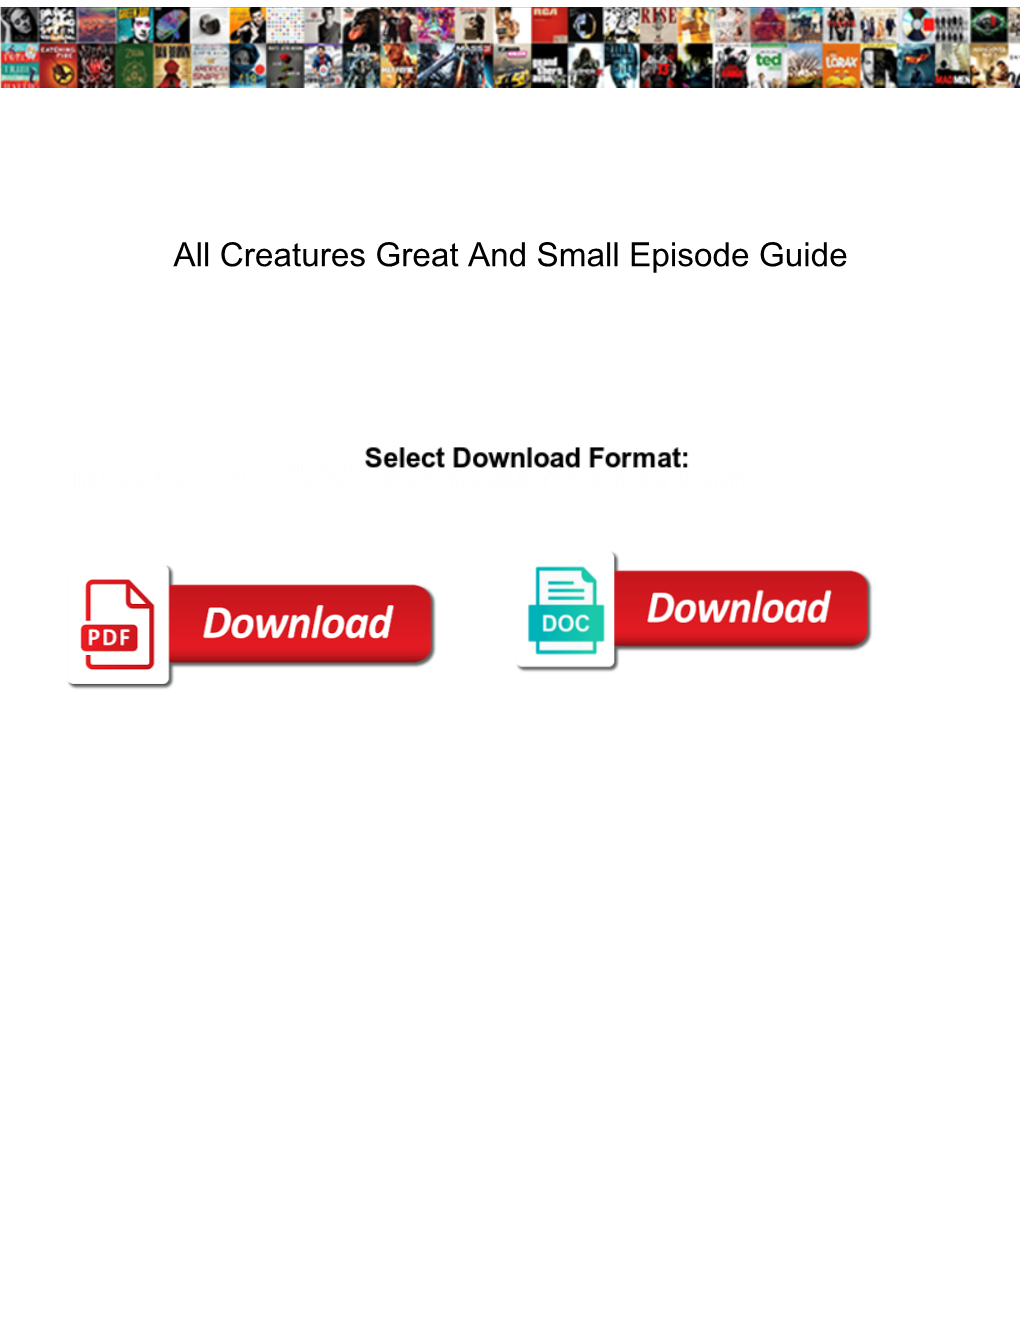 Creatures Great and Small Episode Guide